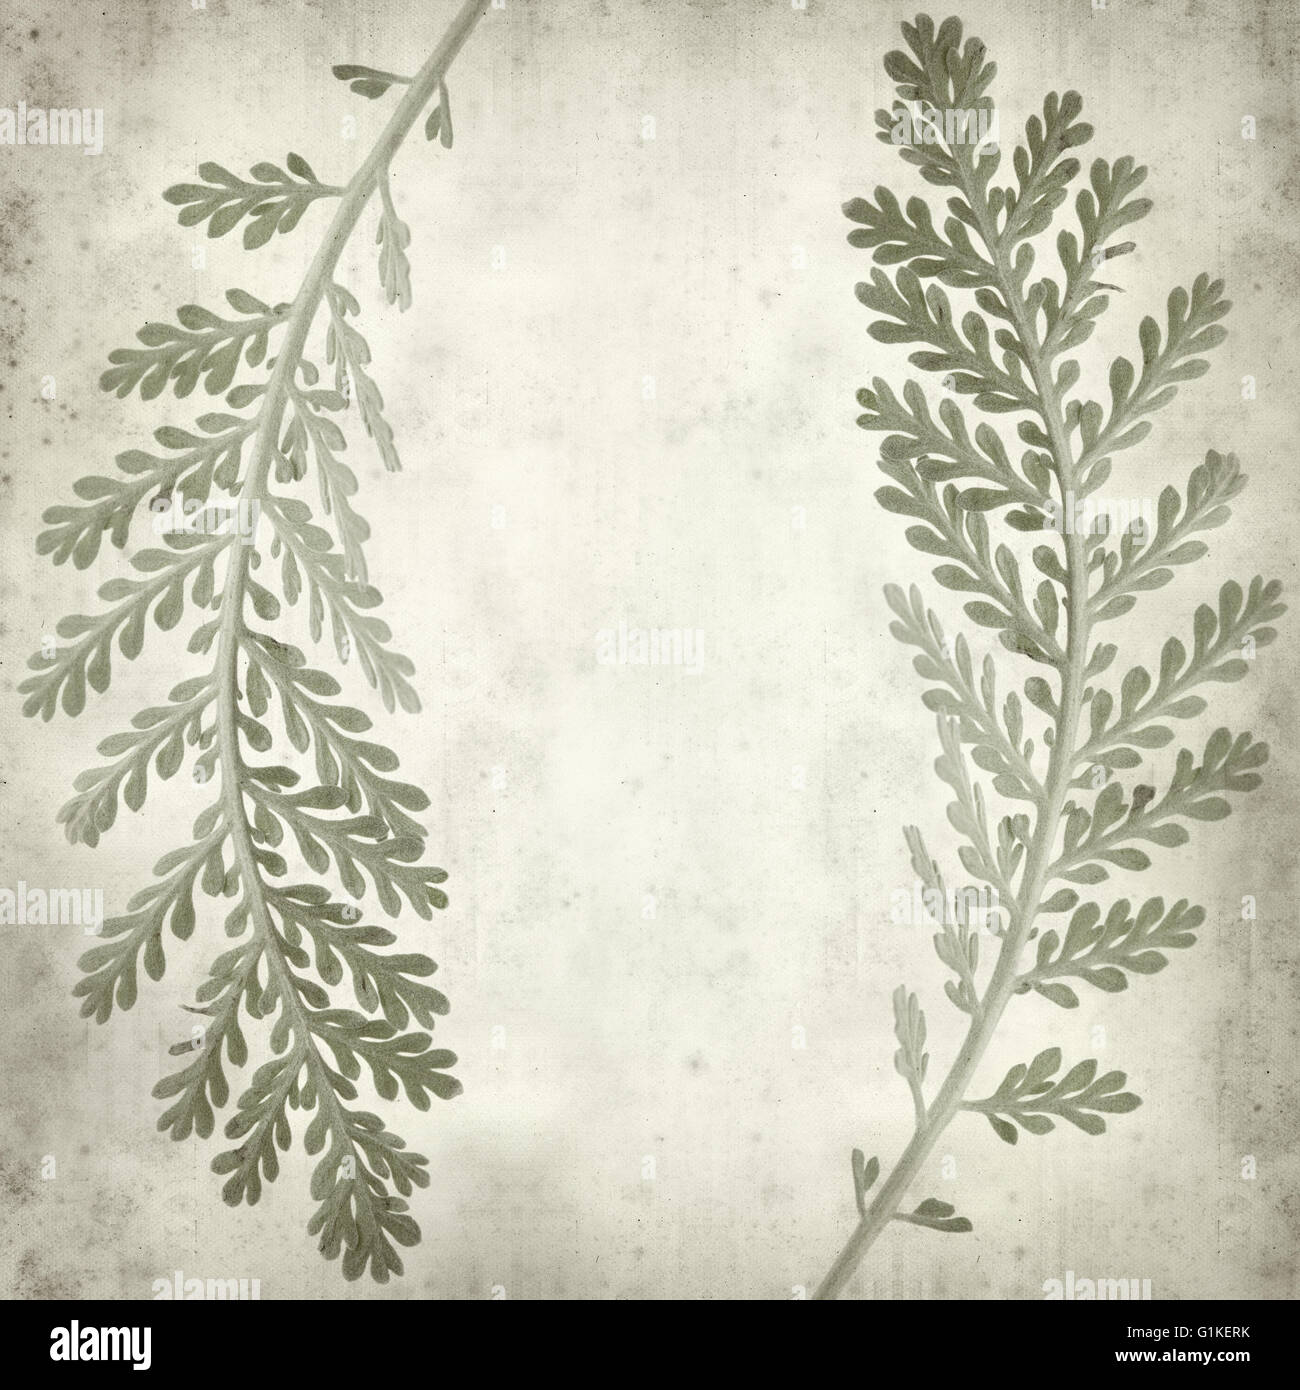 textured old paper background with silver tansy leaves Stock Photo